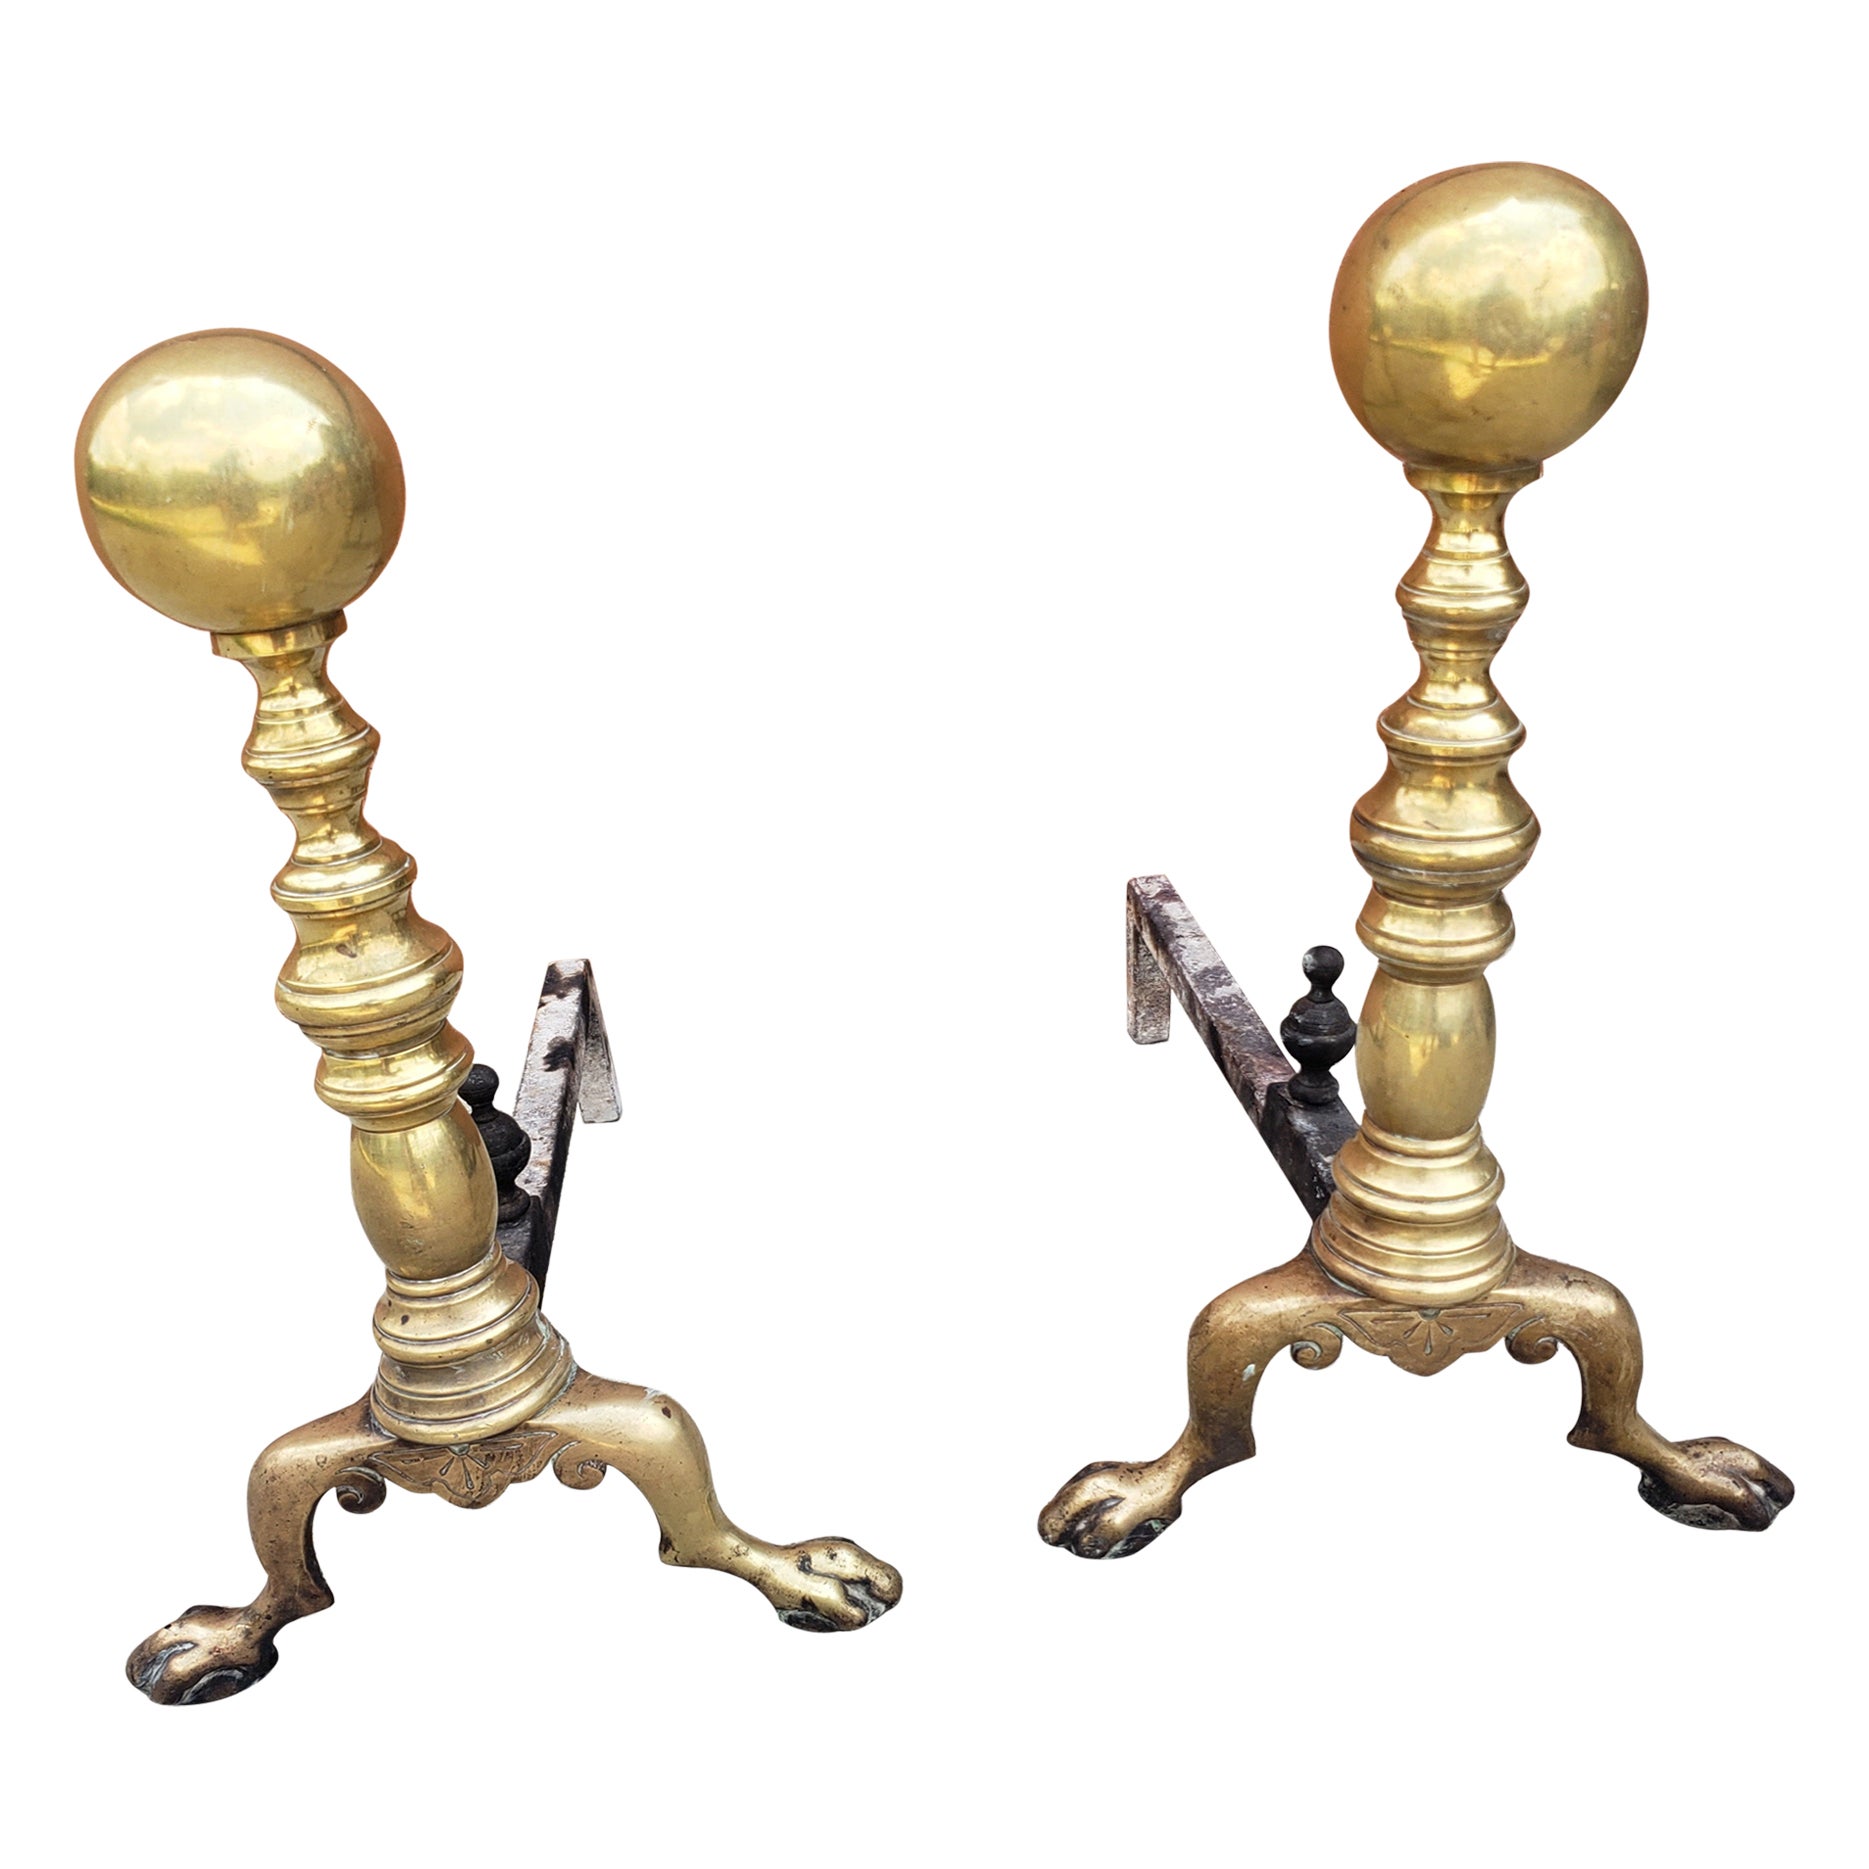 Pair of Early 20th C. George III Style Solid Brass Canon Ball Andirons For Sale